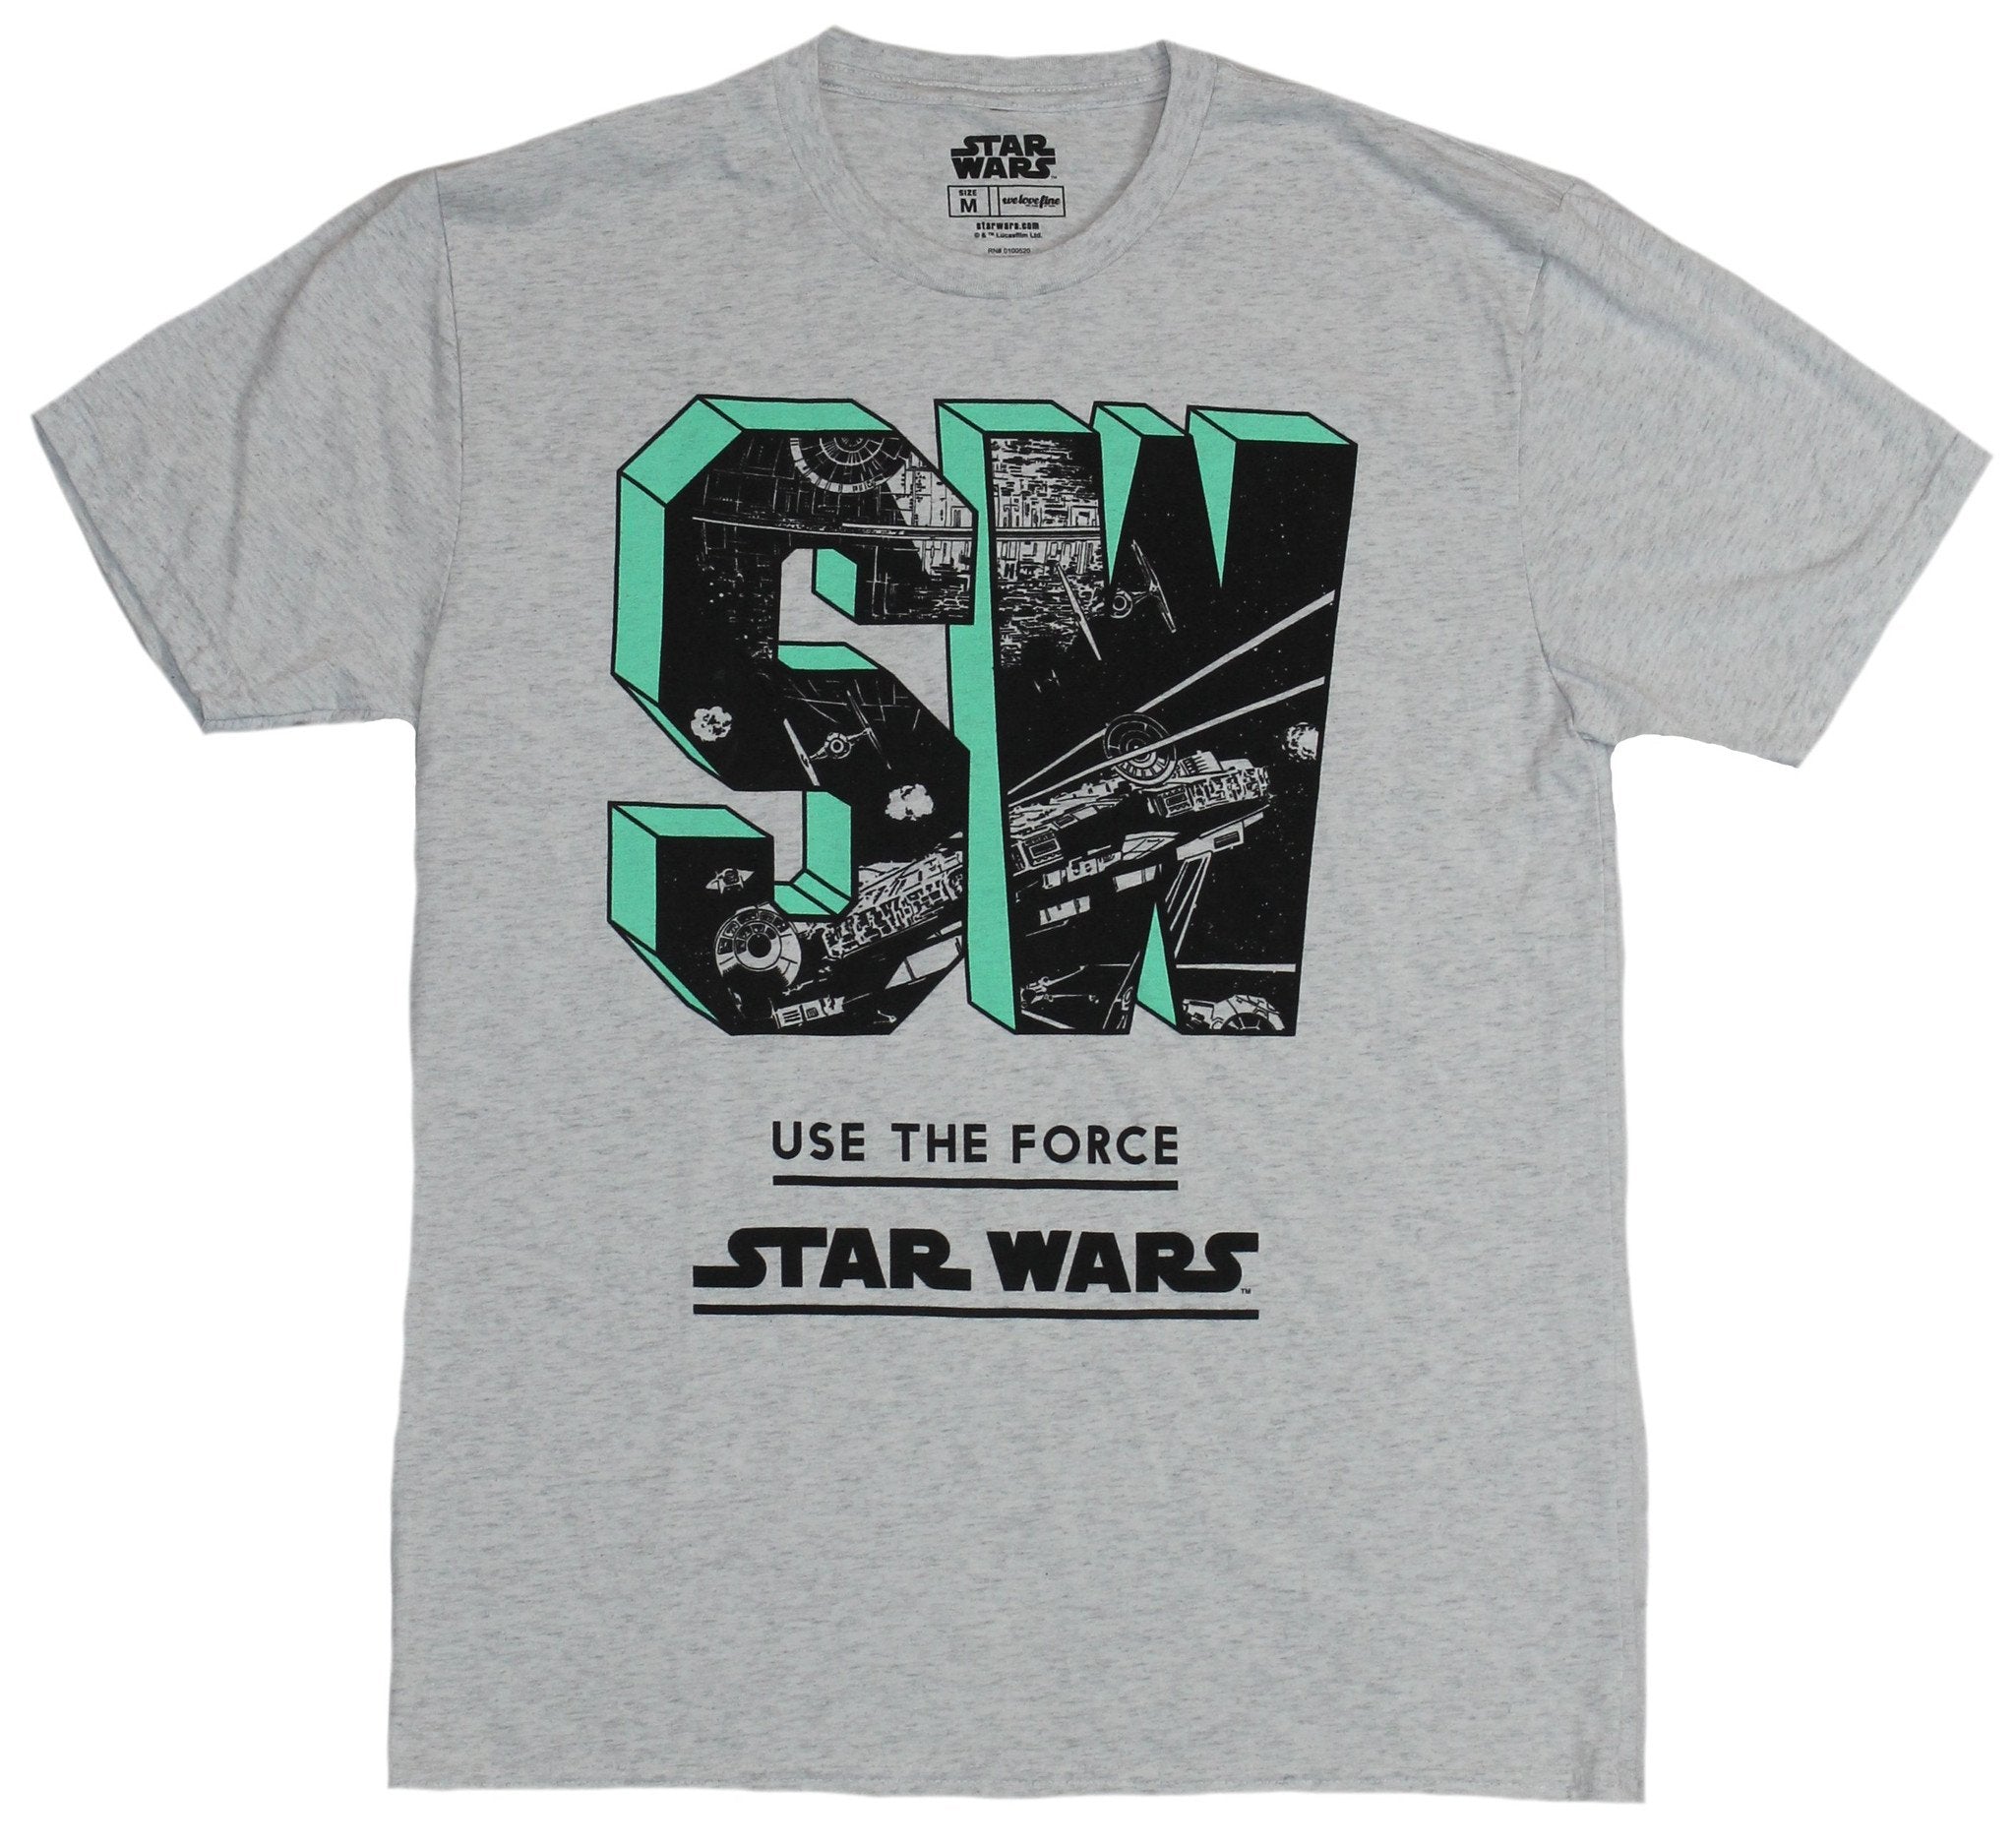 Star Wars Mens T-Shirt -SW Use the Force Battle Filled Letters Image